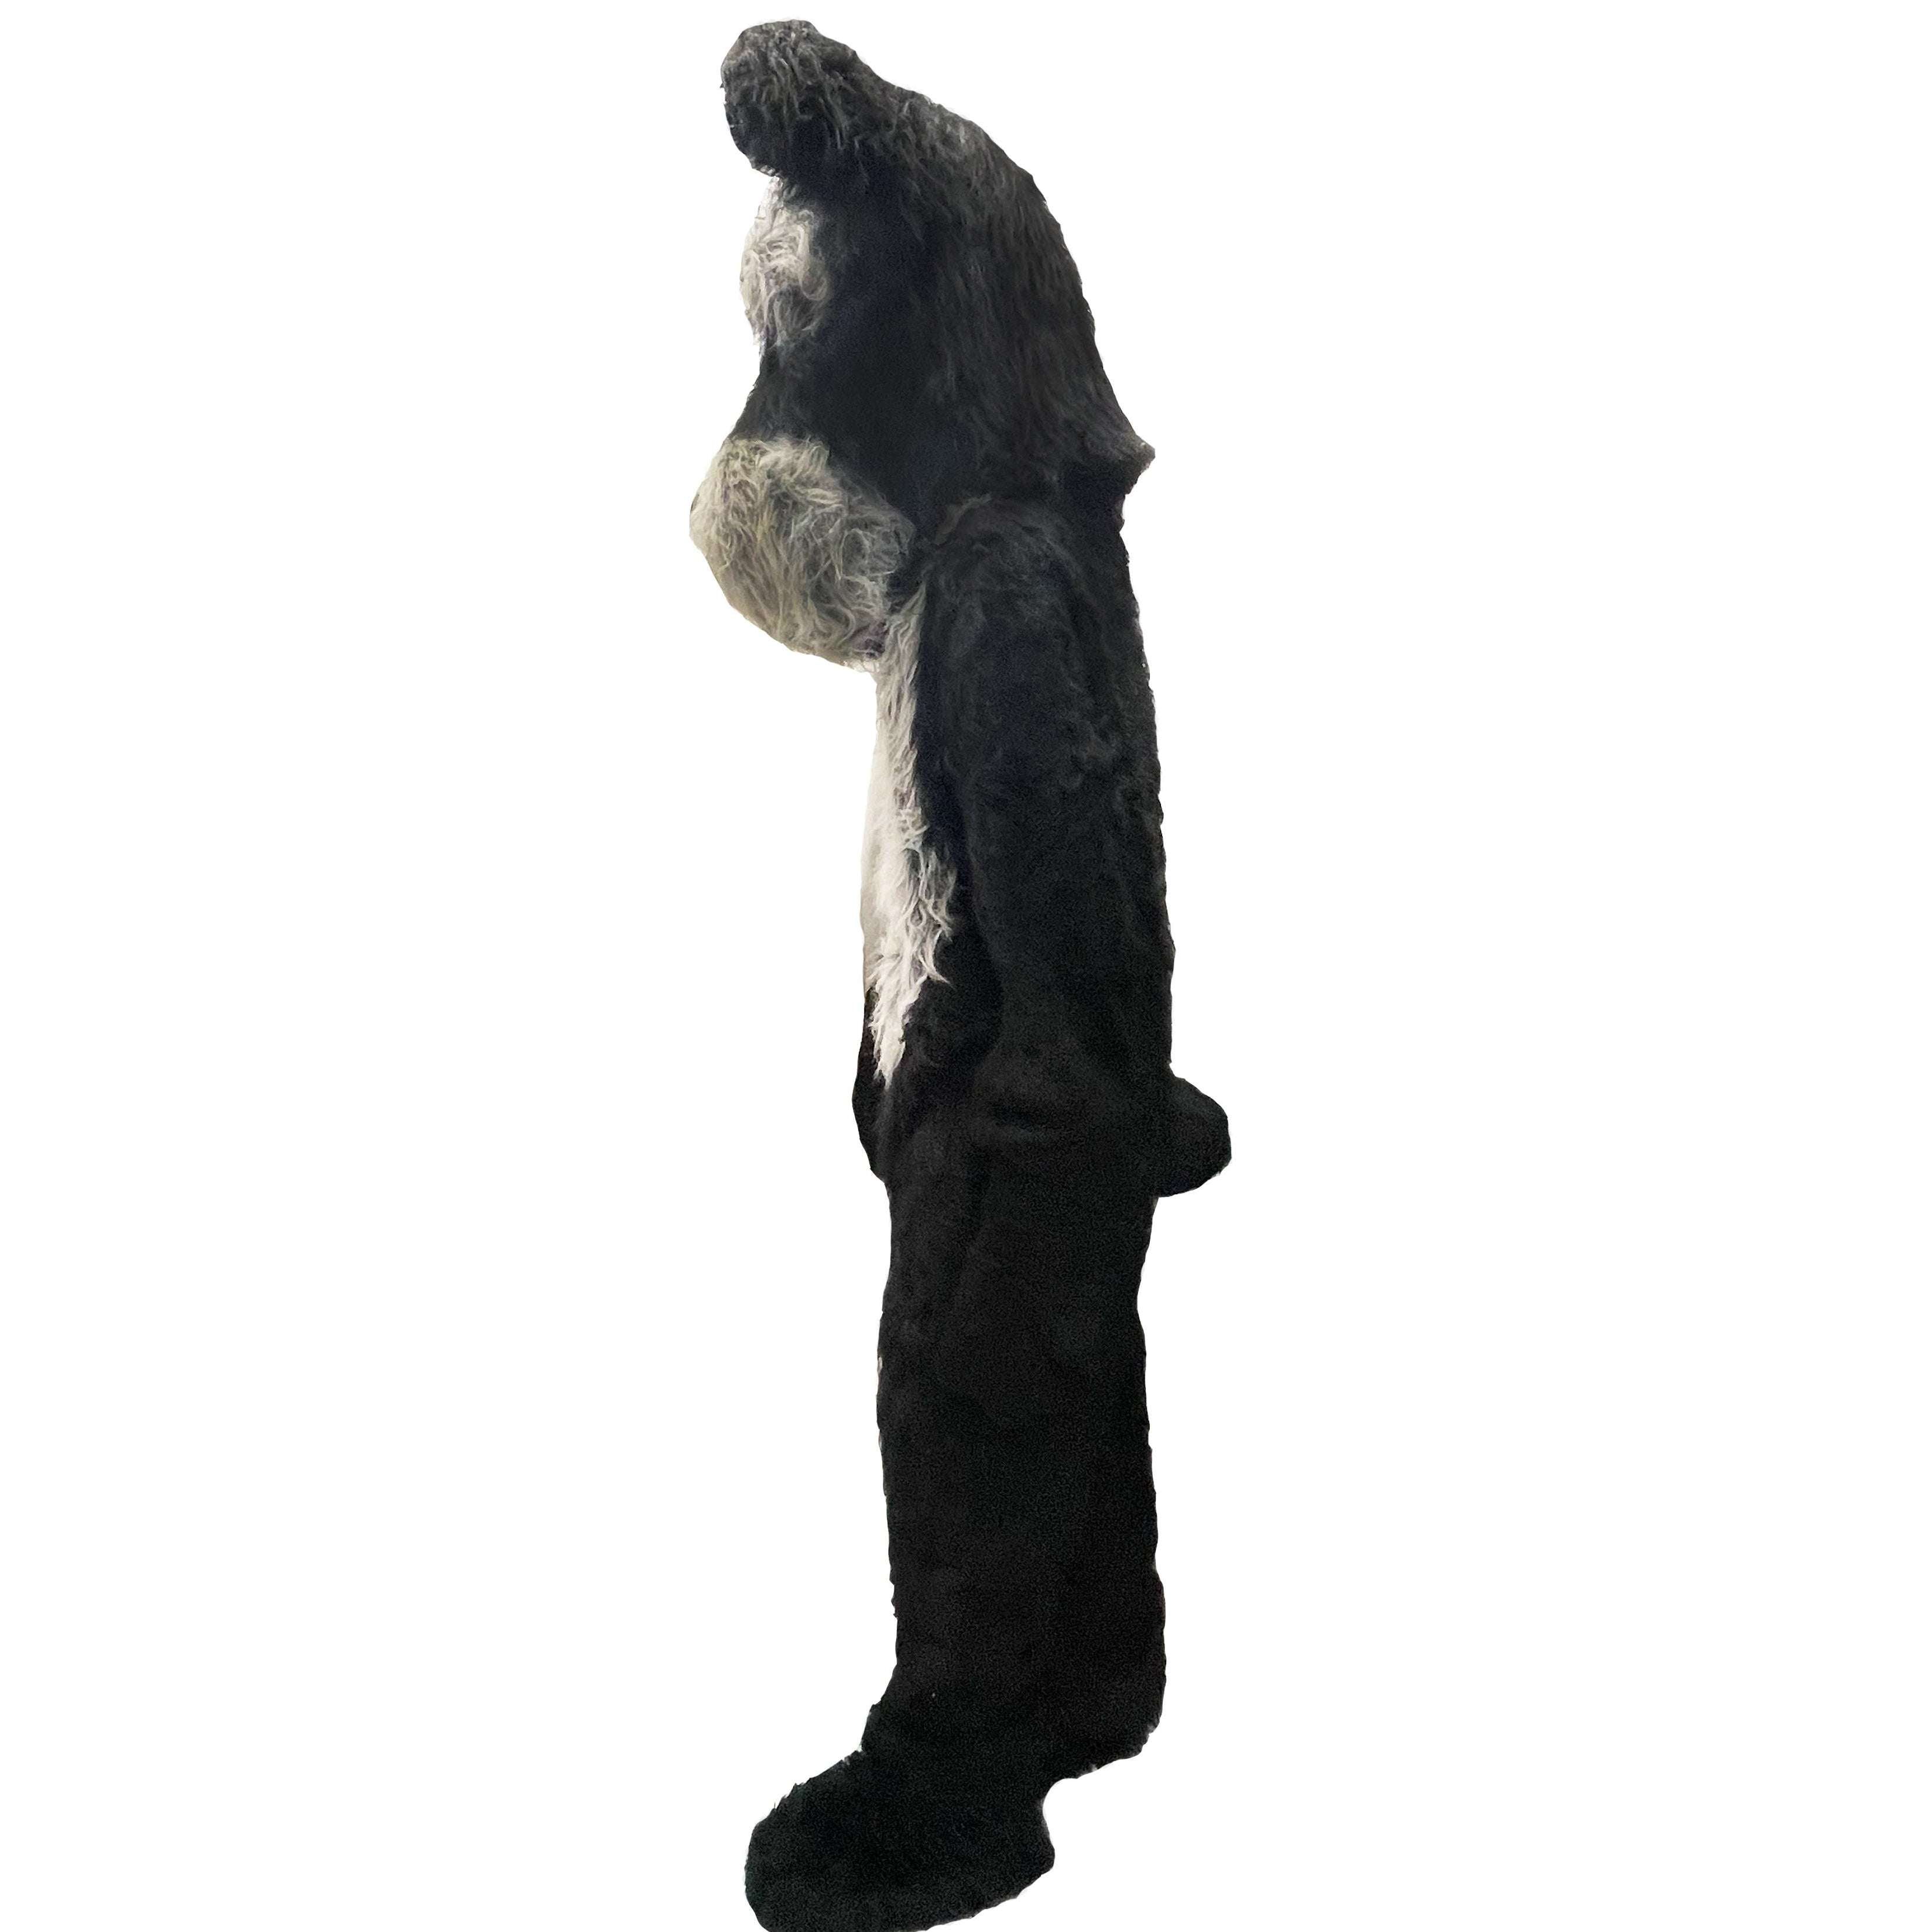 Black And Grey Terrier Mascot Adult Costume